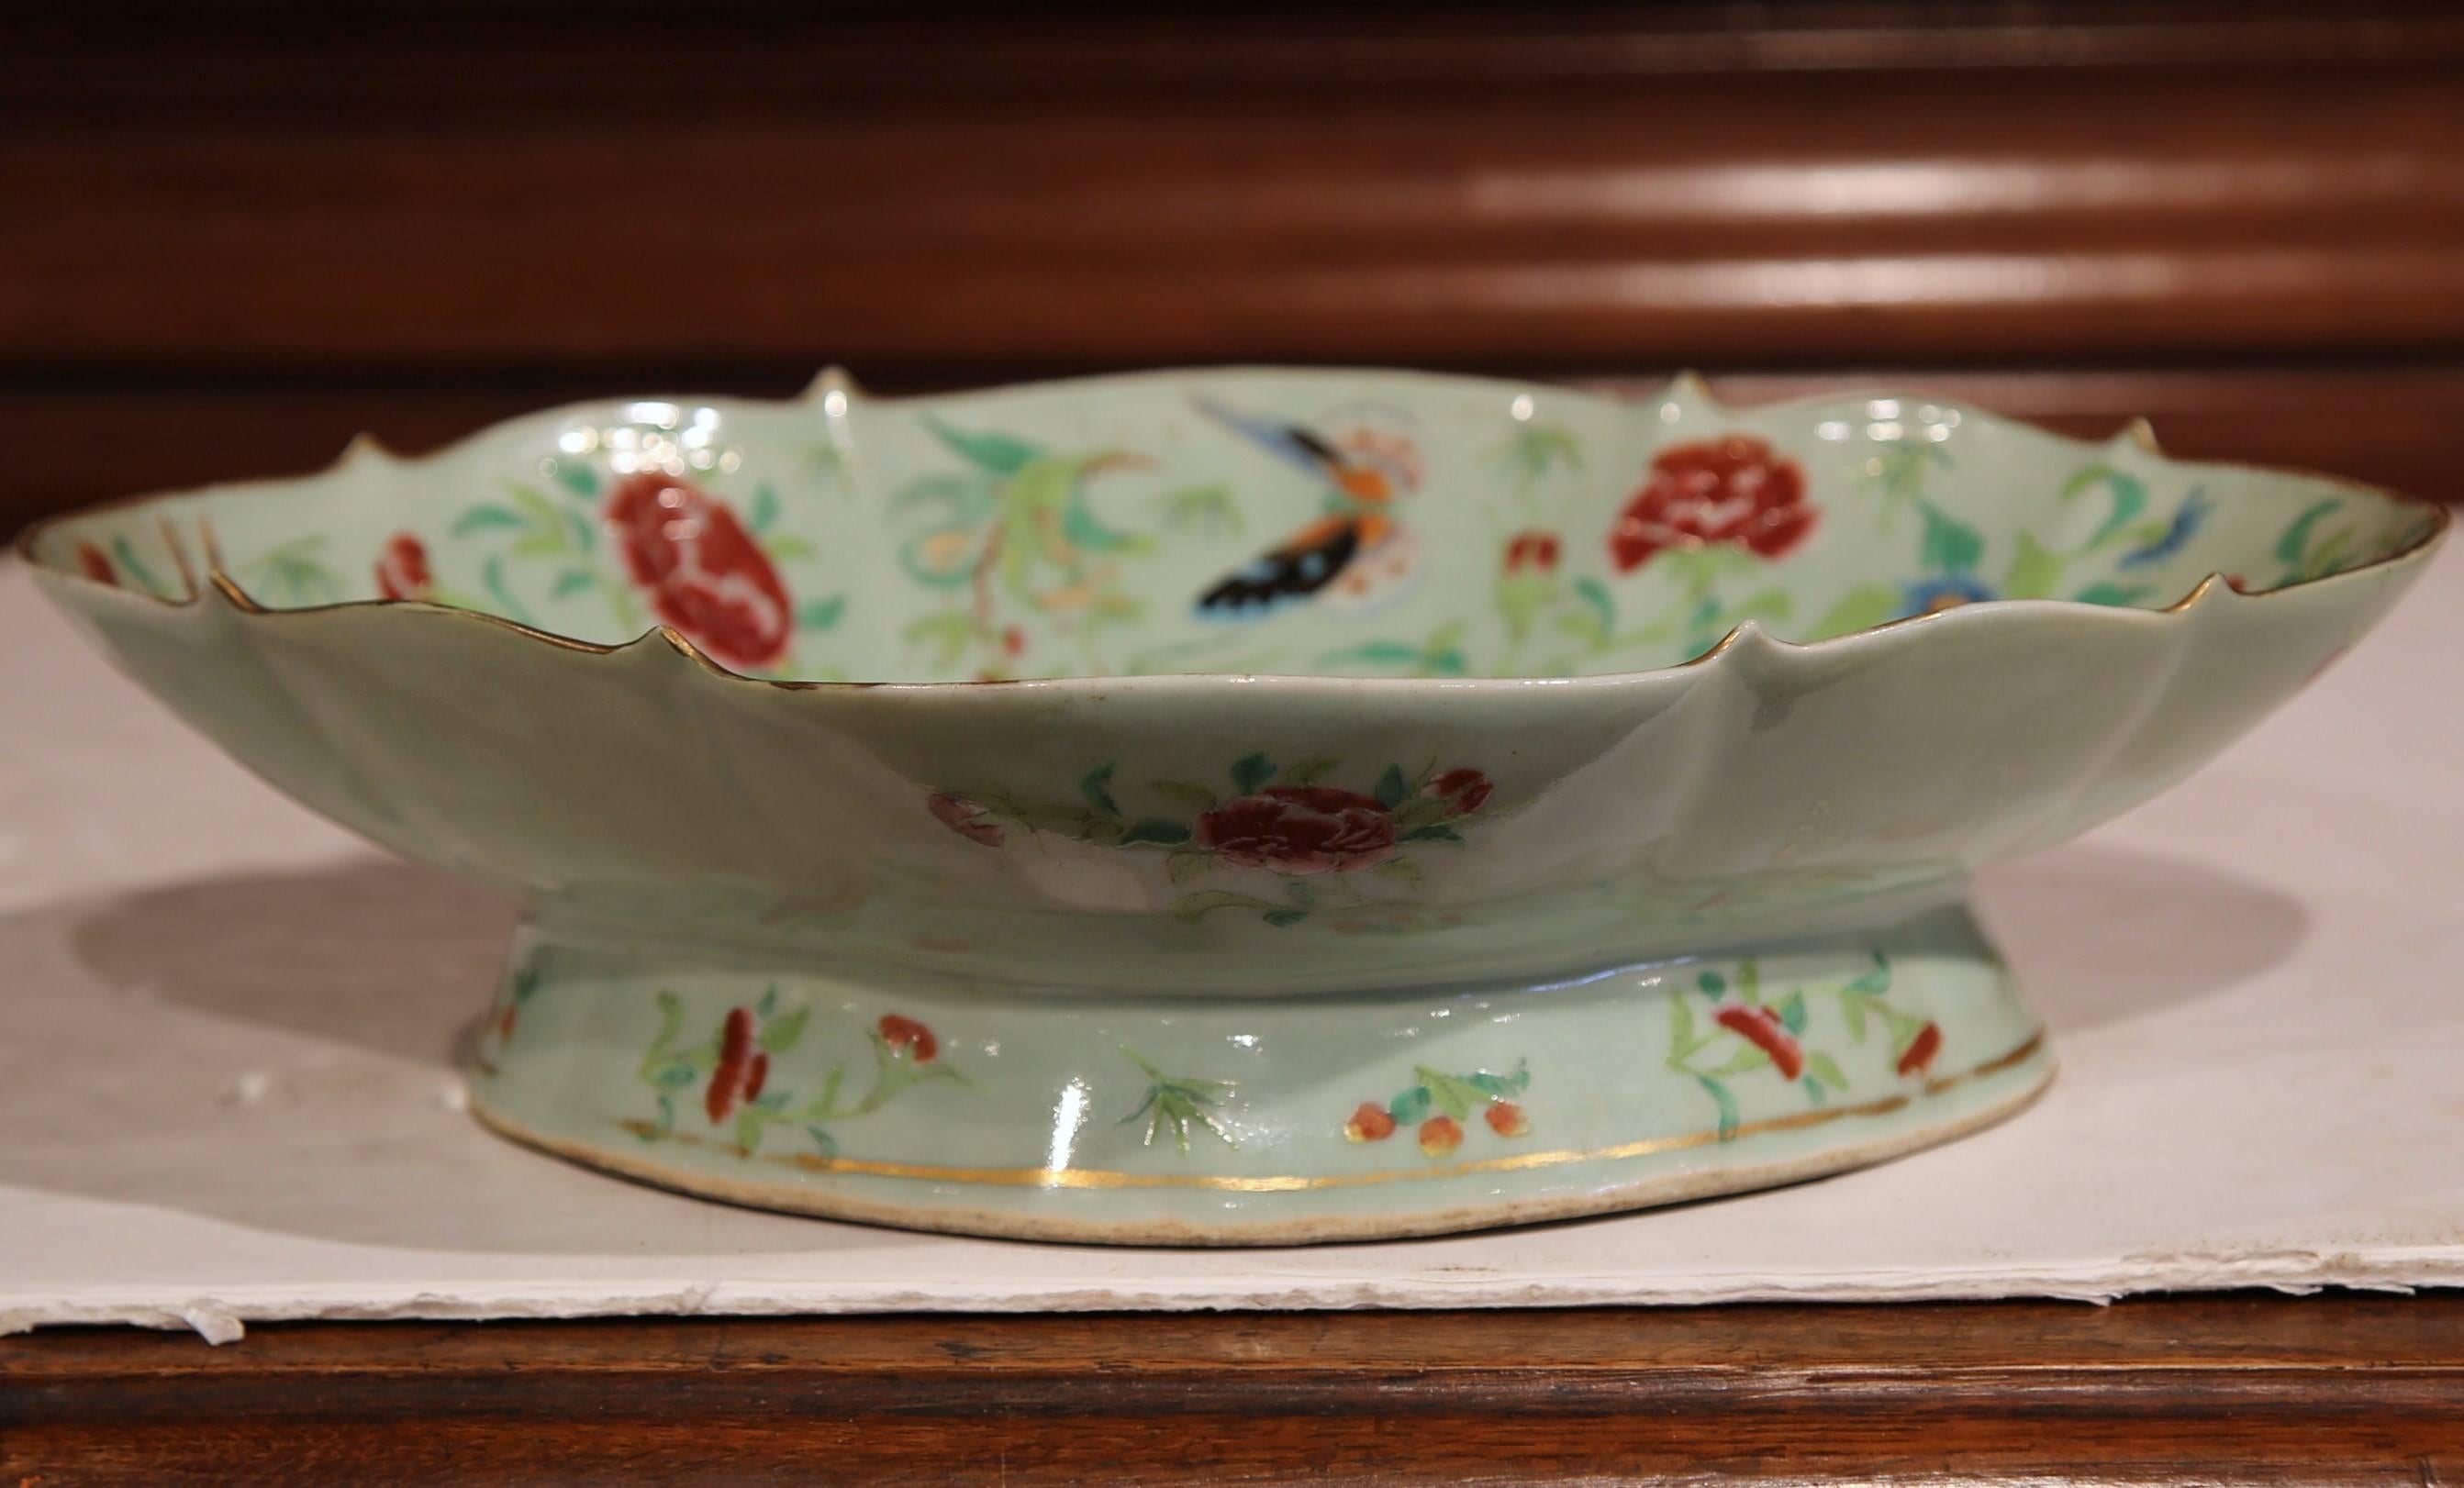 This colorful antique vide-poche was sculpted in China, circa 1860. The shallow, hand-painted porcelain tray features a large peacock in the center, another off to the side, and numerous butterflies and flower motifs throughout. The decorative